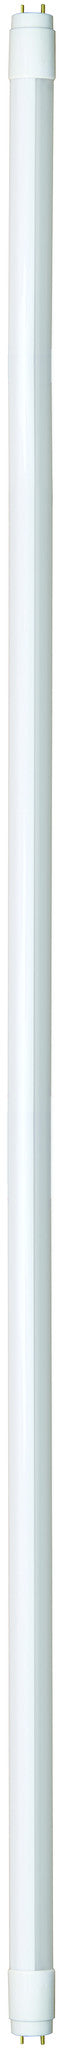 167369 - EcoWatts - Tube LED T8 G13 60cm 10W 4000K 900Lm  The Lampco - The Lamp Company